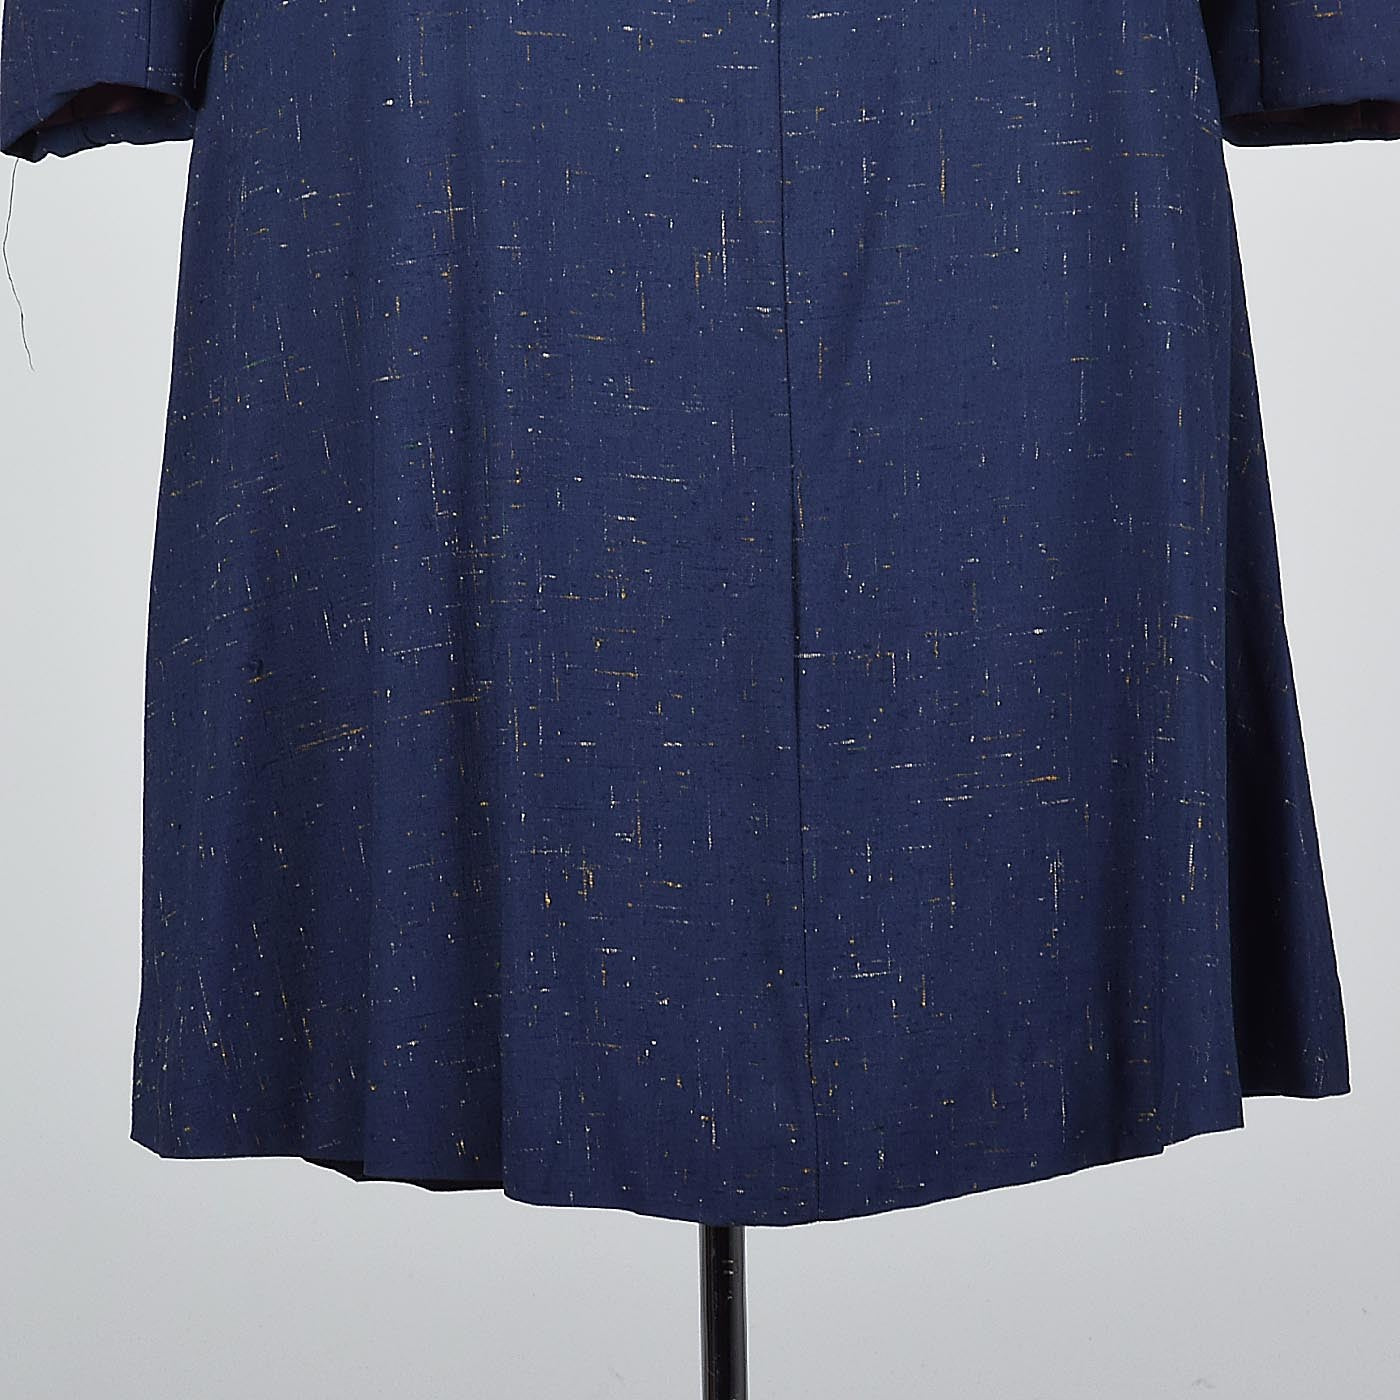 1940s Skirt Suit in Flecked Navy Fabric